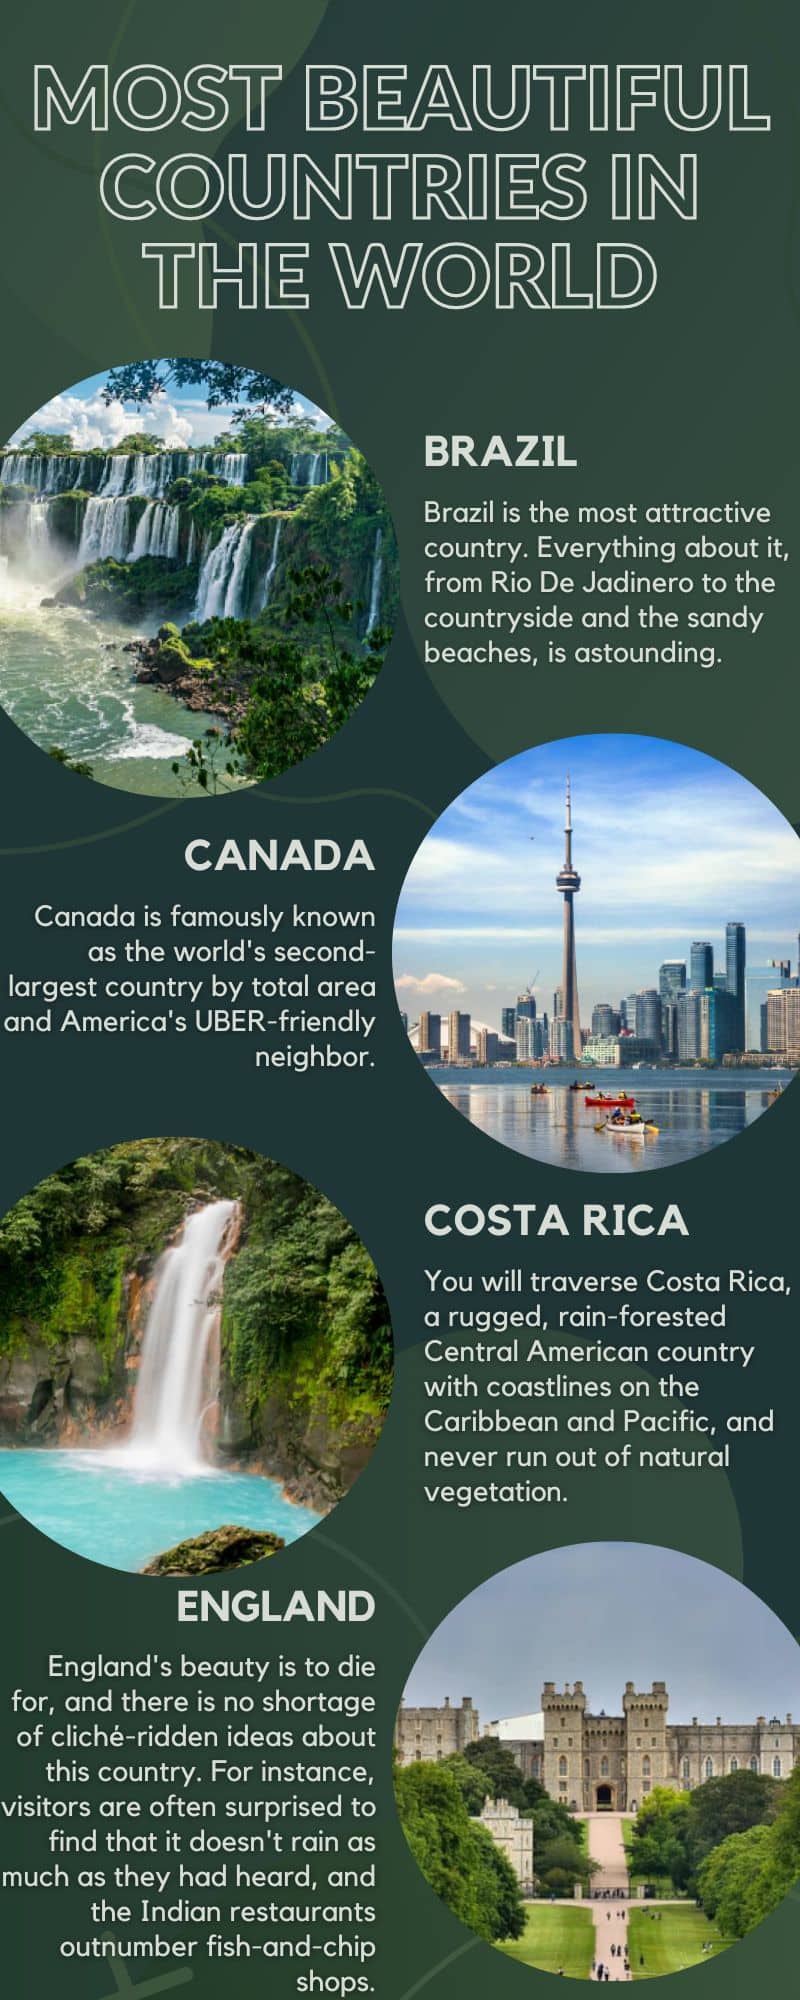 Most beautiful countries in the world